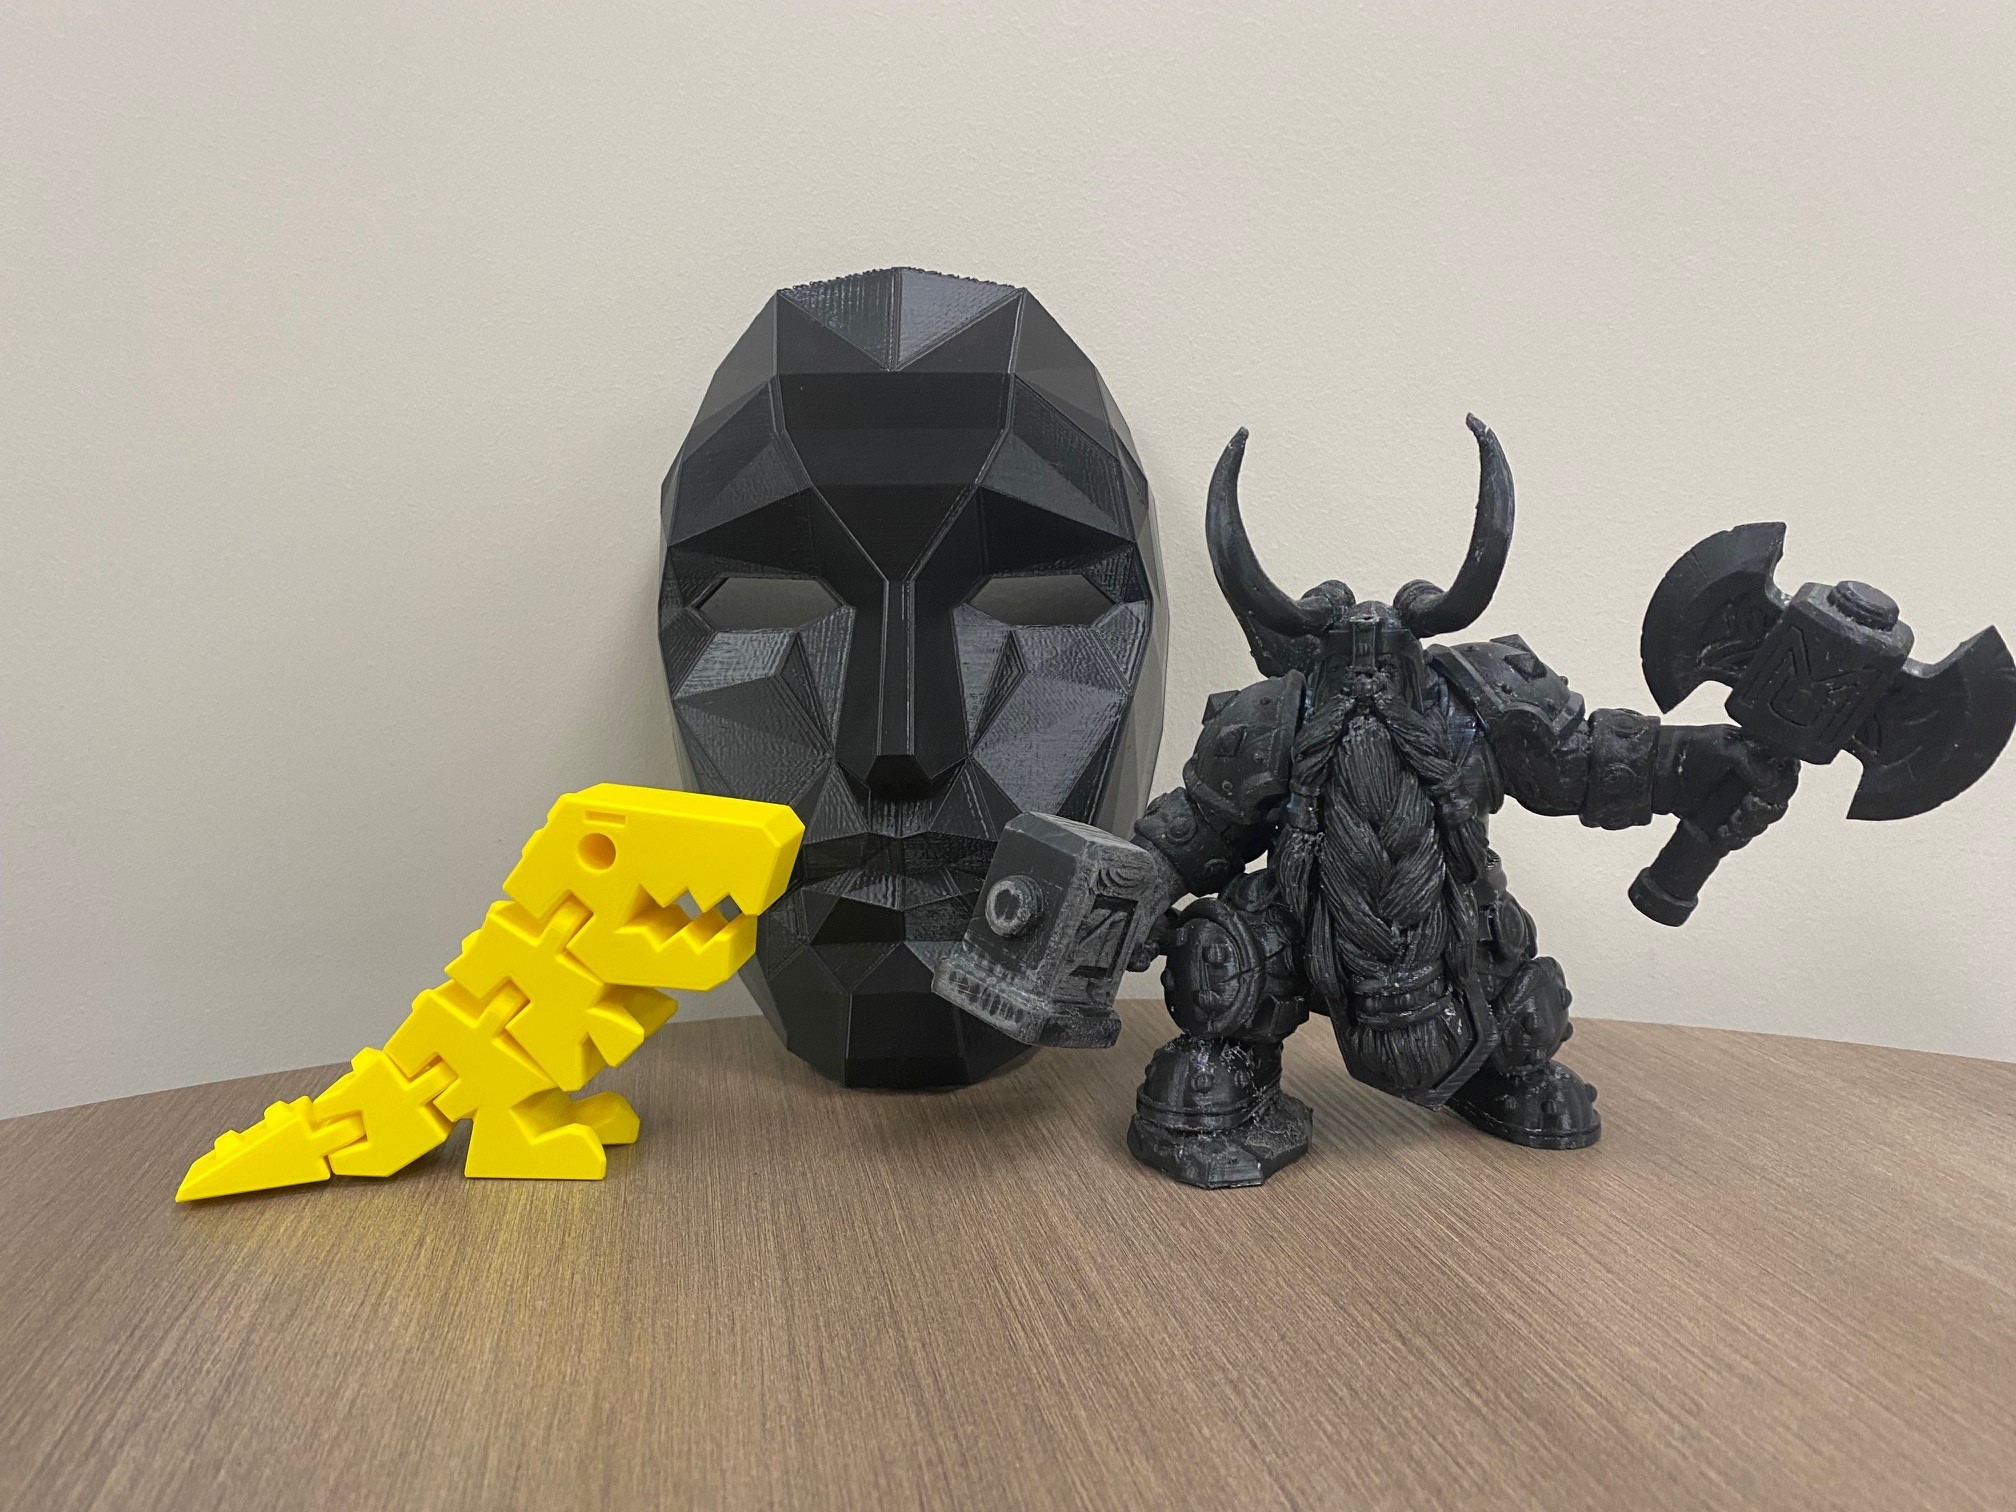 a yellow dinosaur, black mask, and character with horns